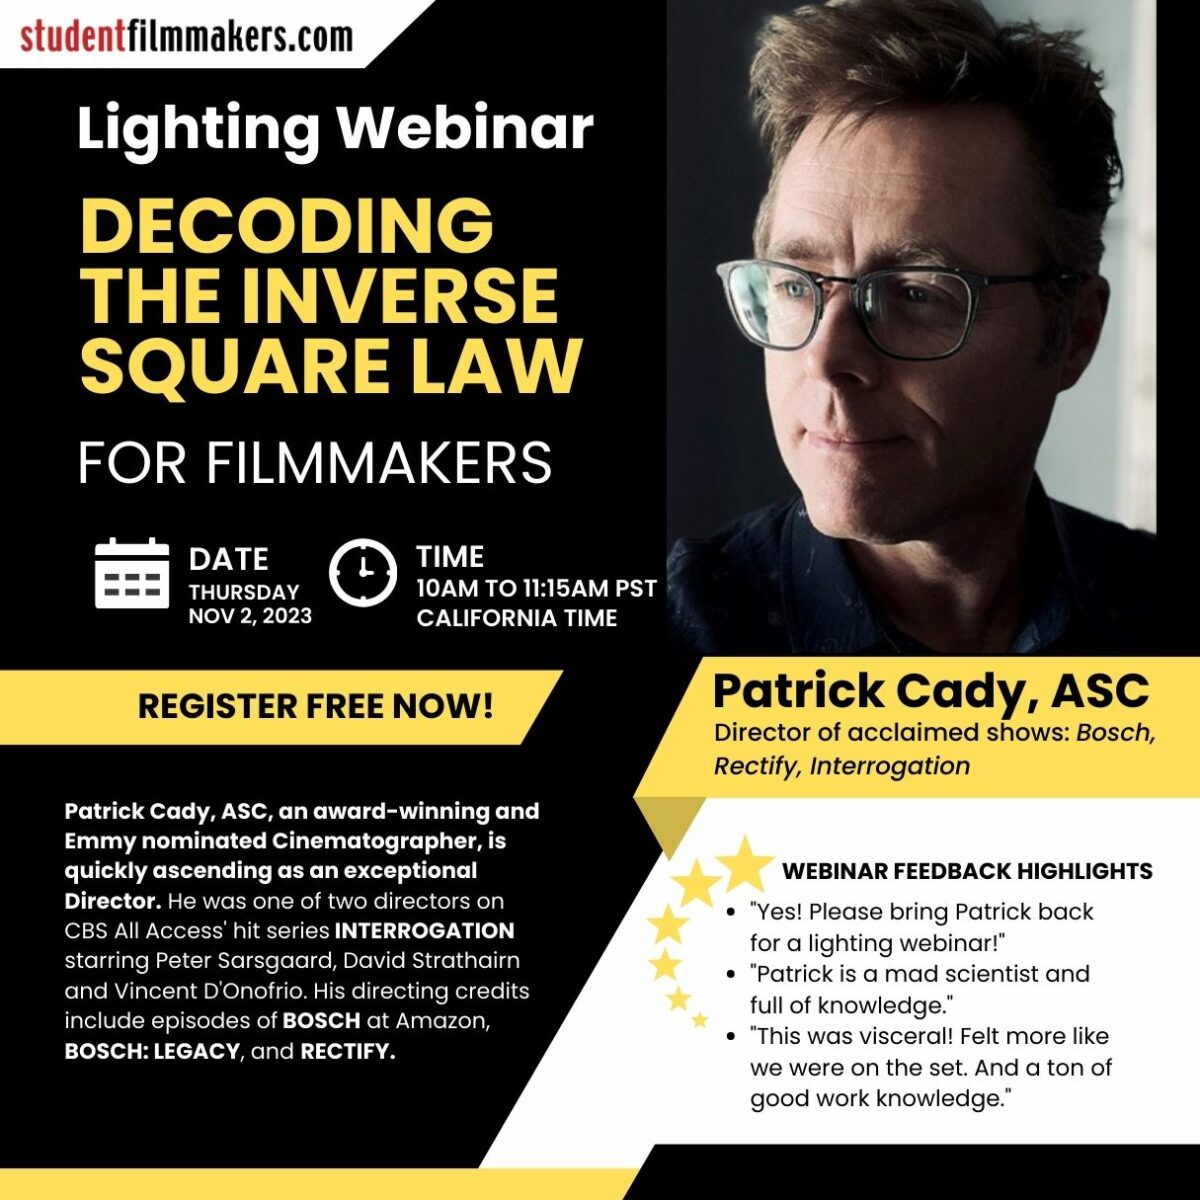 Live Lighting Webinar | Decoding the Inverse Square Law for Filmmakers with Patrick Cady, ASC